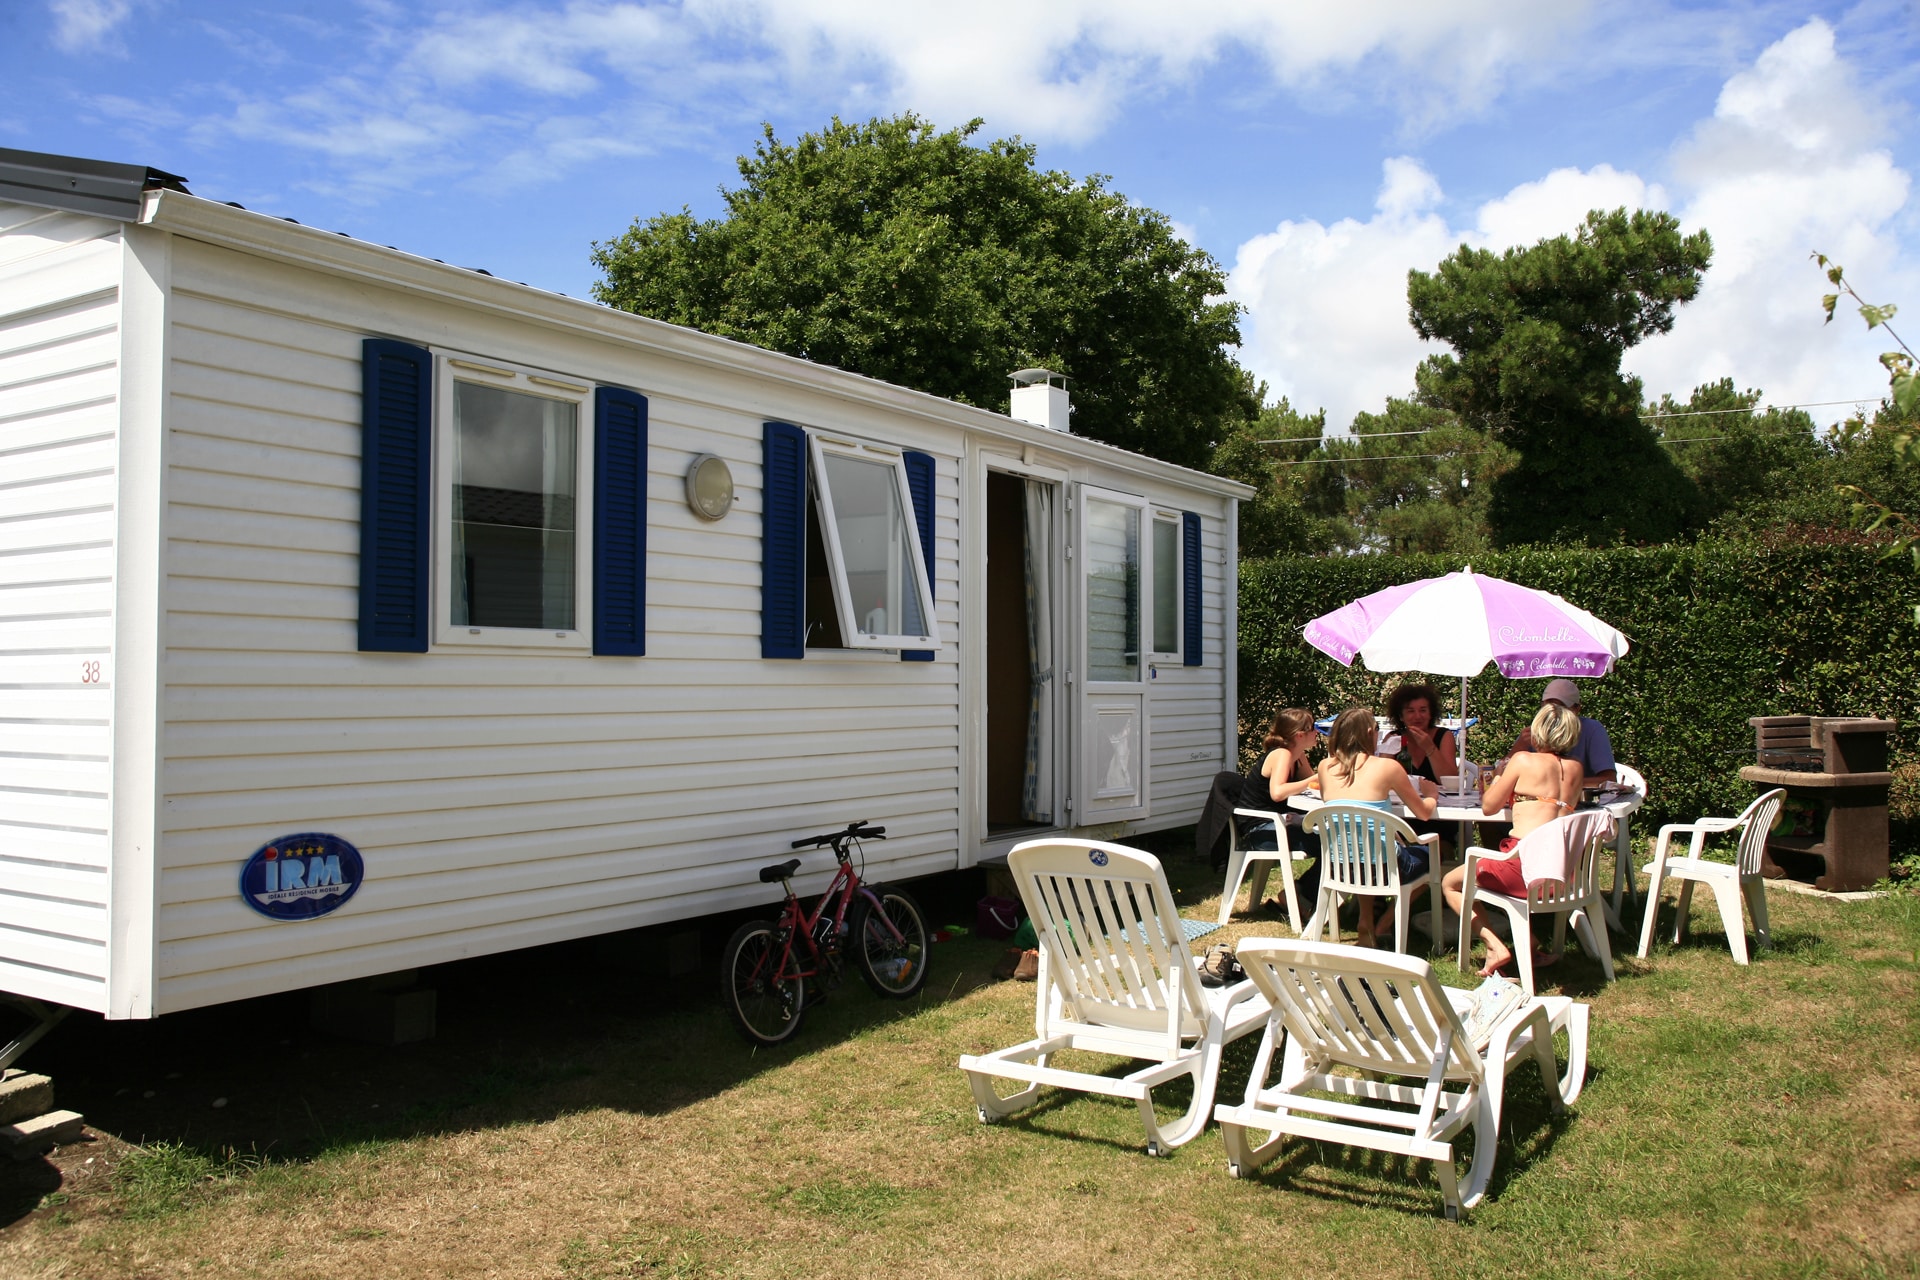 Mobile homes at the campsite